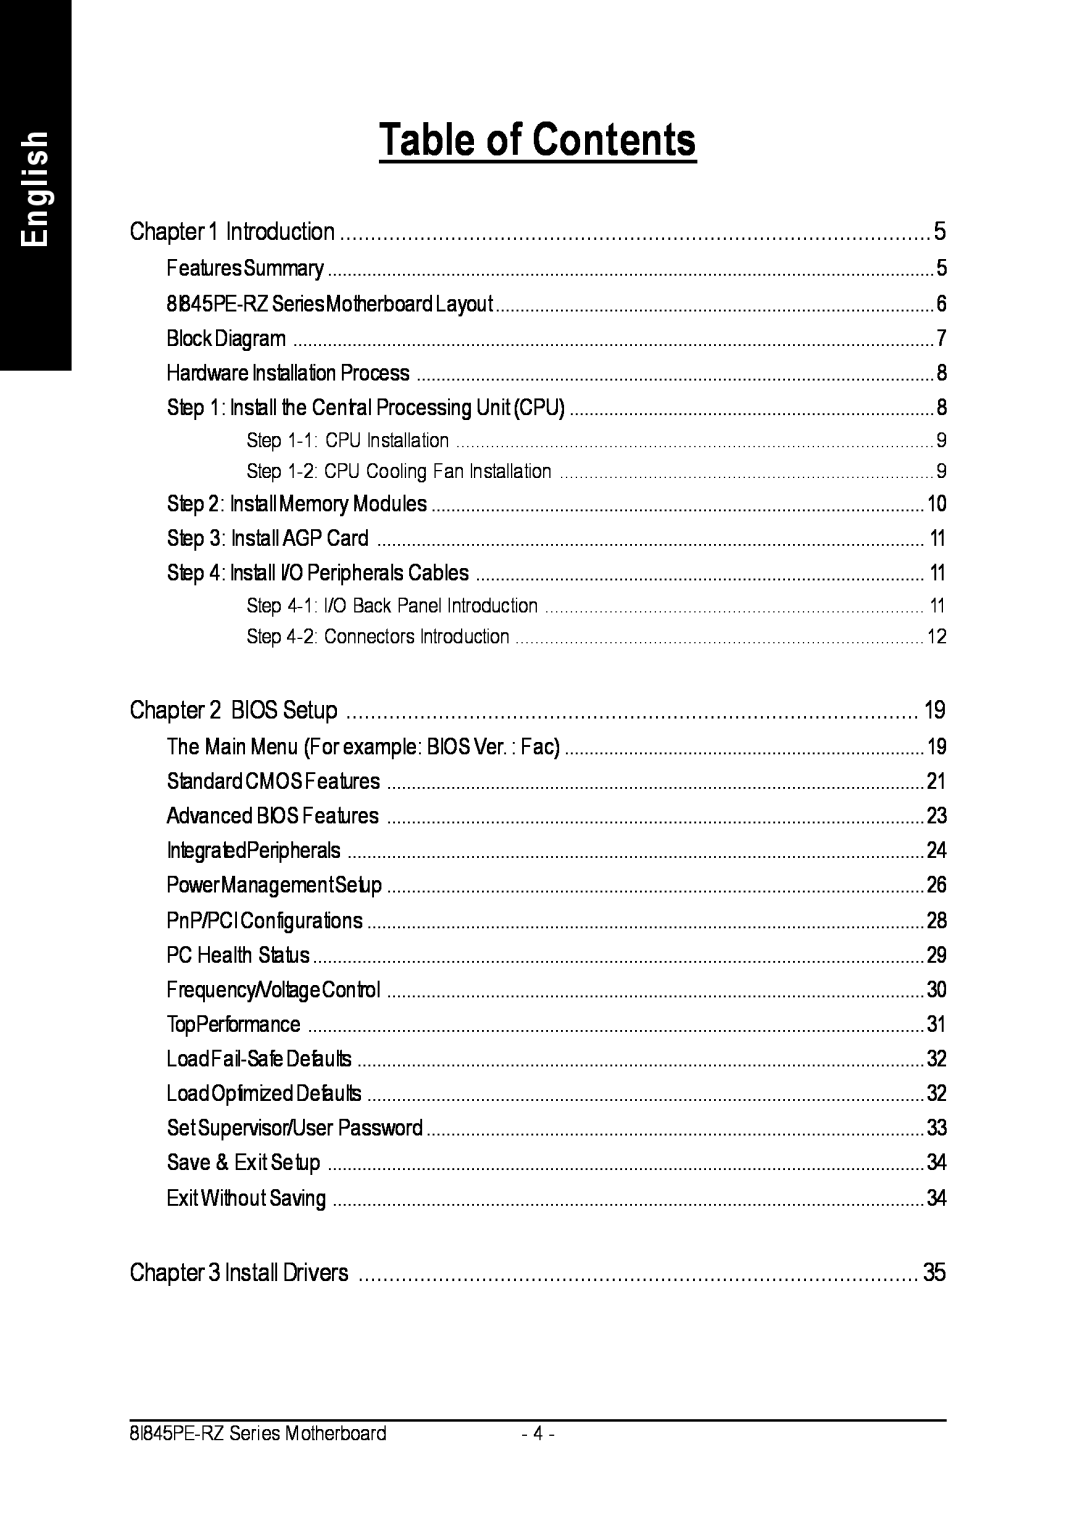 Intel 8I845PE-RZ-C user manual English, Table of Contents 